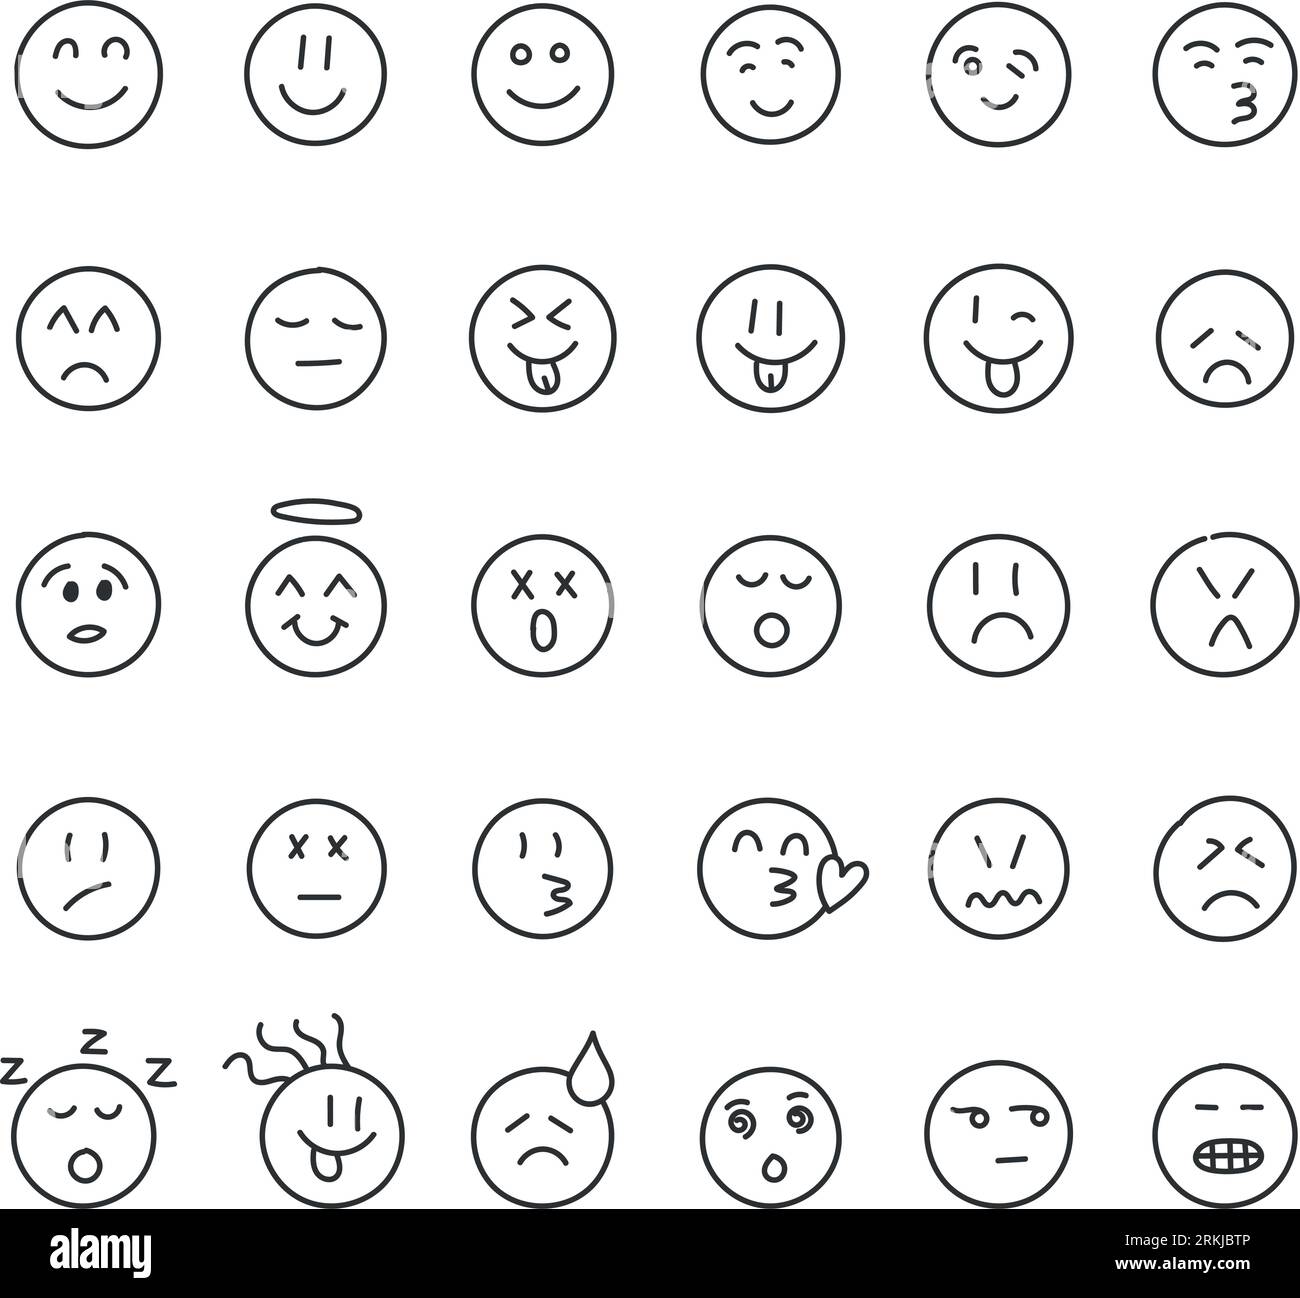 Emojis faces icon in hand drawn style. Doddle emoticons vector ...